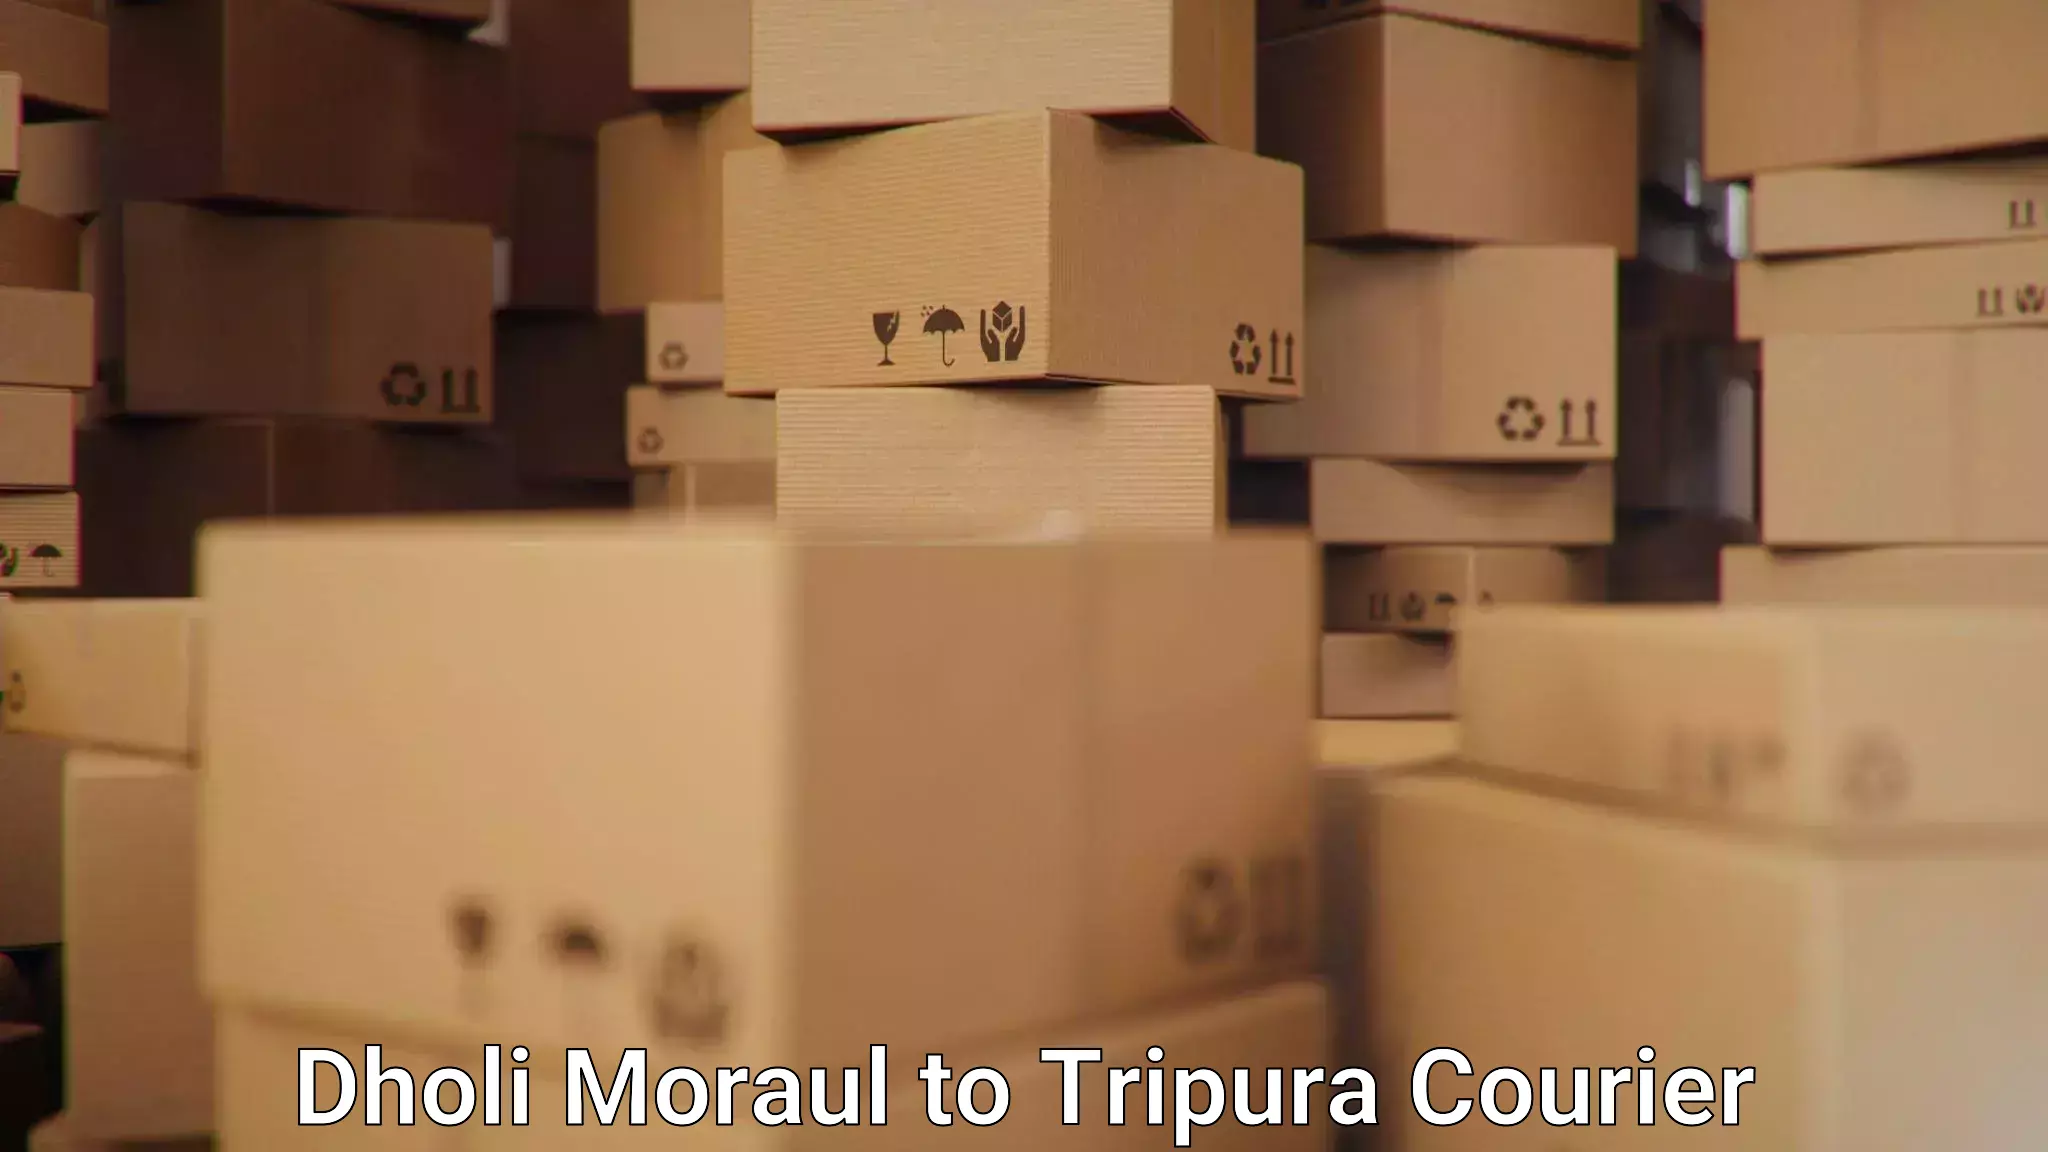 Express package services Dholi Moraul to Tripura